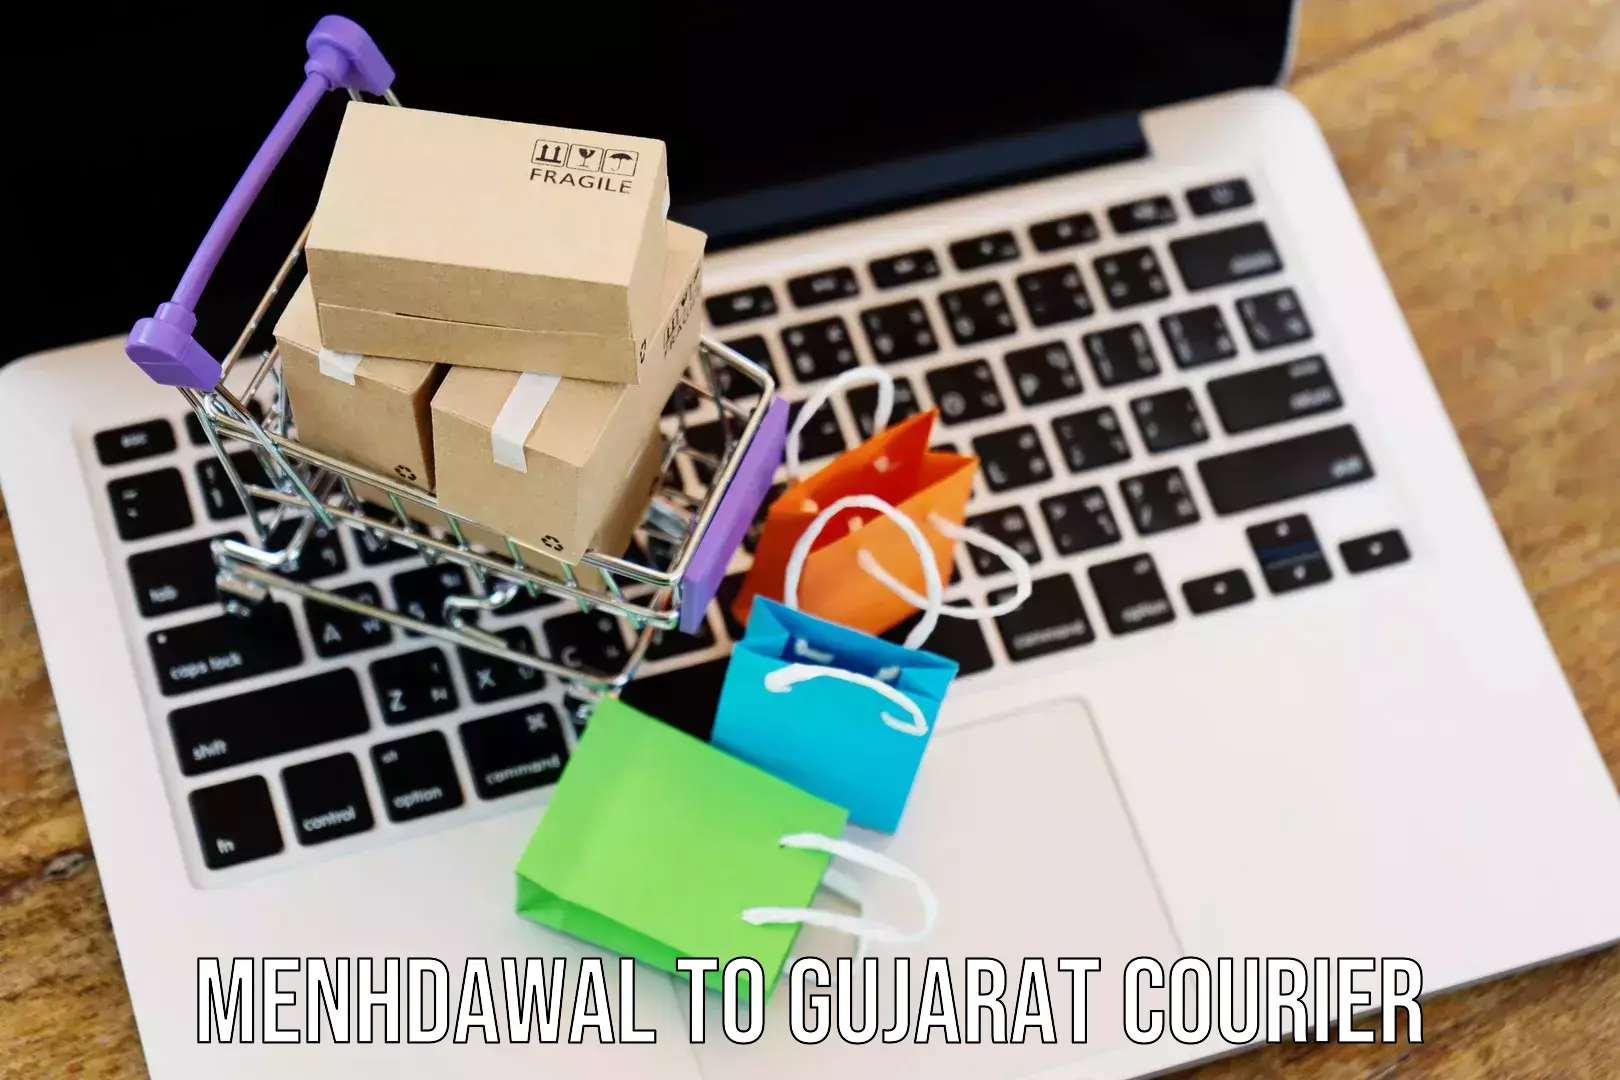 On-call courier service Menhdawal to Gujarat